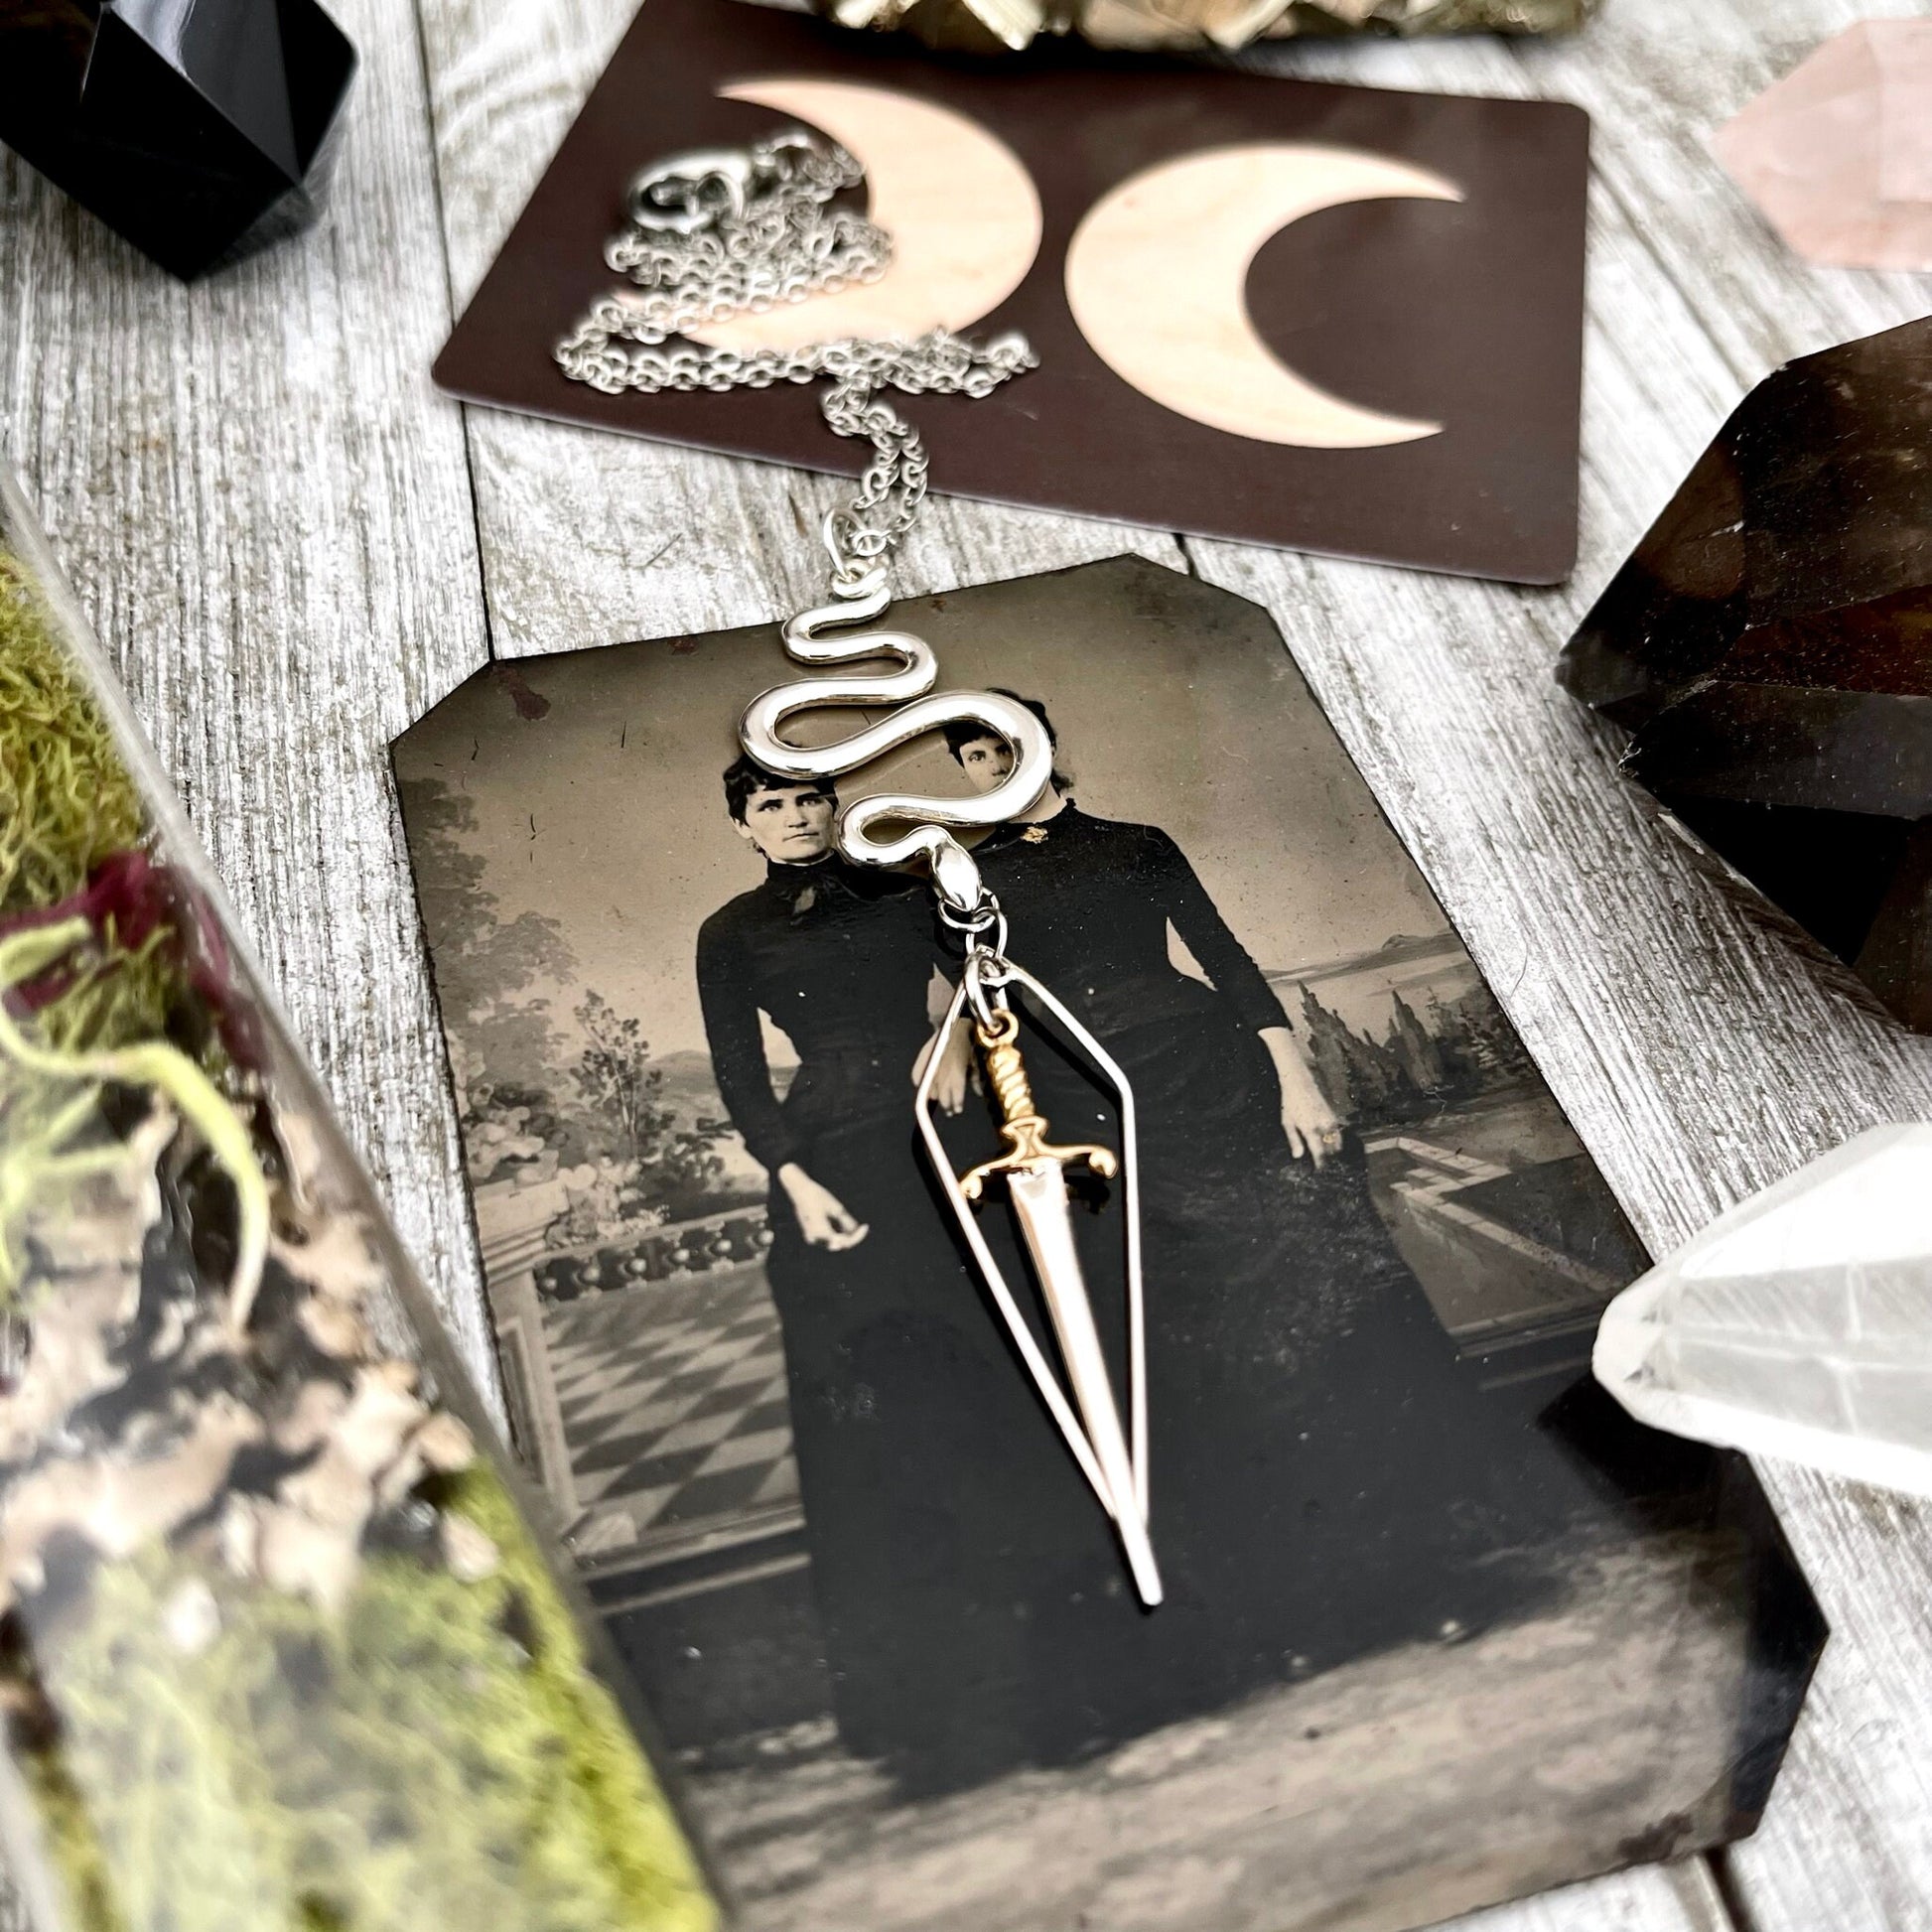 925 Sterling Silver, boho jewelry, Etsy ID: 1640899984, Gift for Woman, Gothic Jewelry, Jewelry, Layered charm, Necklaces, Pendants, Snake talisman, Sterling Silver, sword necklace, Talisman Necklace, TINY TALISMANS, Witch Jewelry, Witch necklace, Witchy